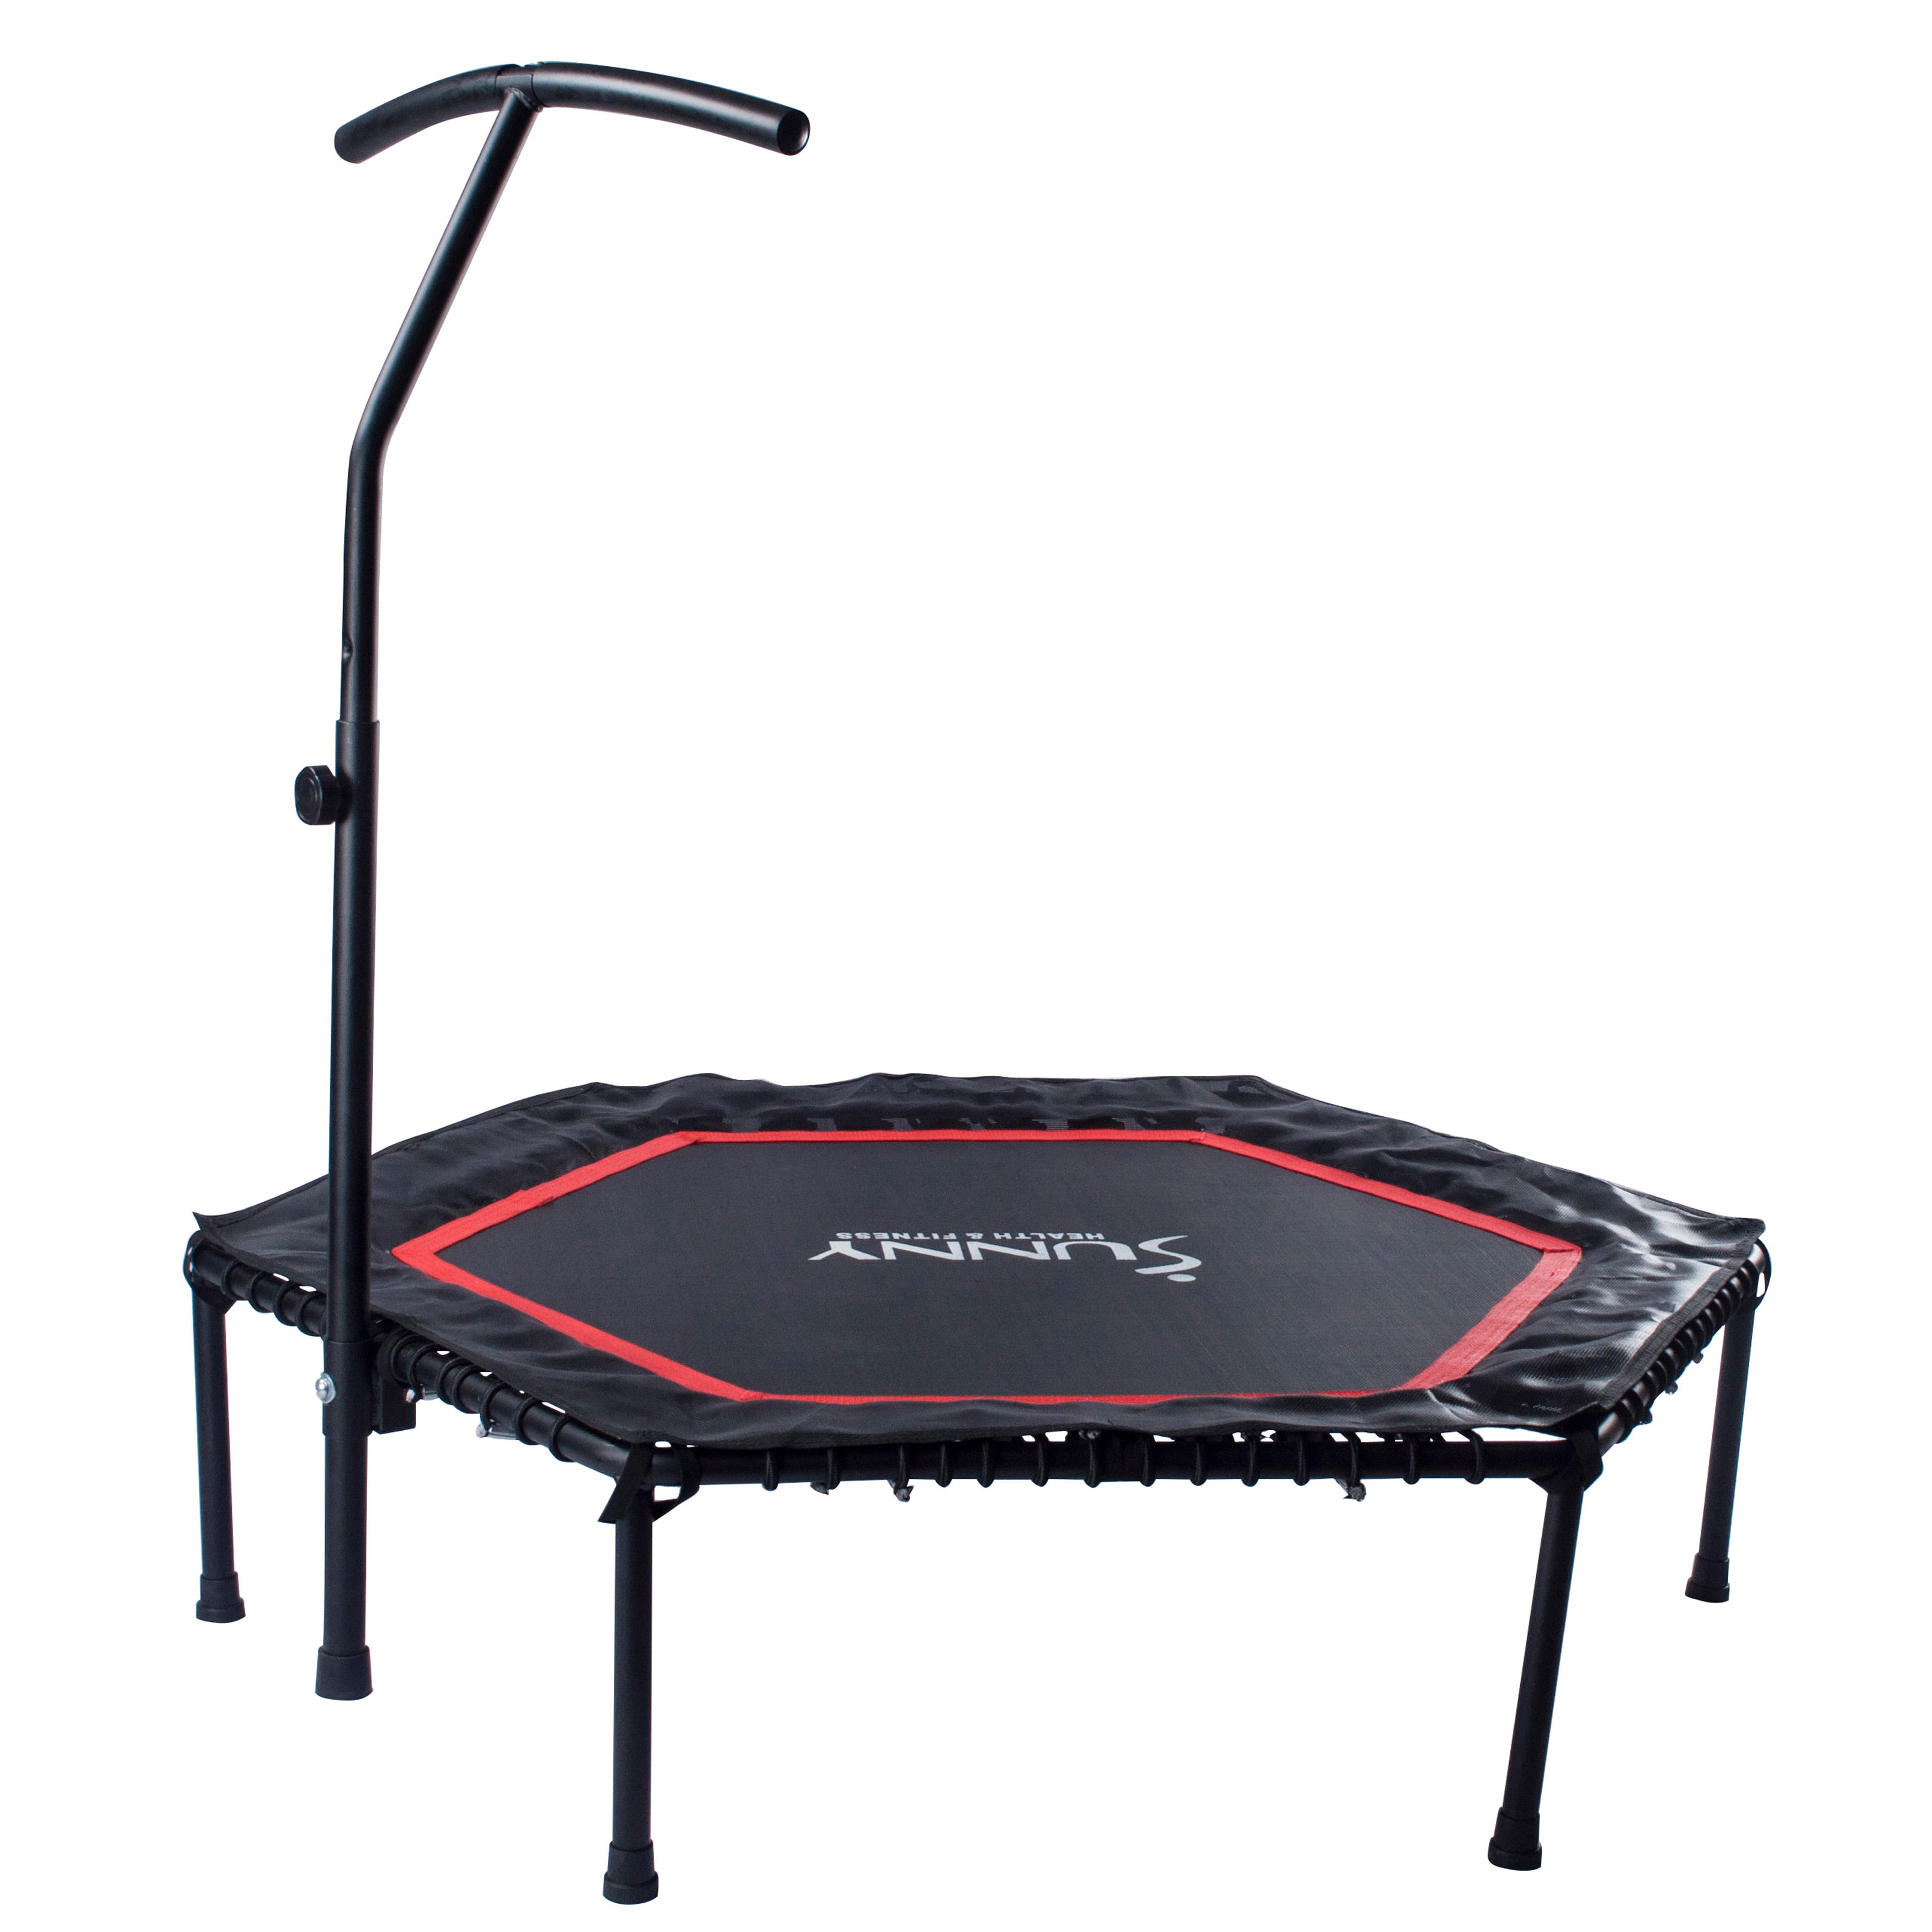 Sunny Health & NO. Indoor Fitness Adjustable Exercise Mini Rebounder 079 with Handlebar, Trampoline Fitness